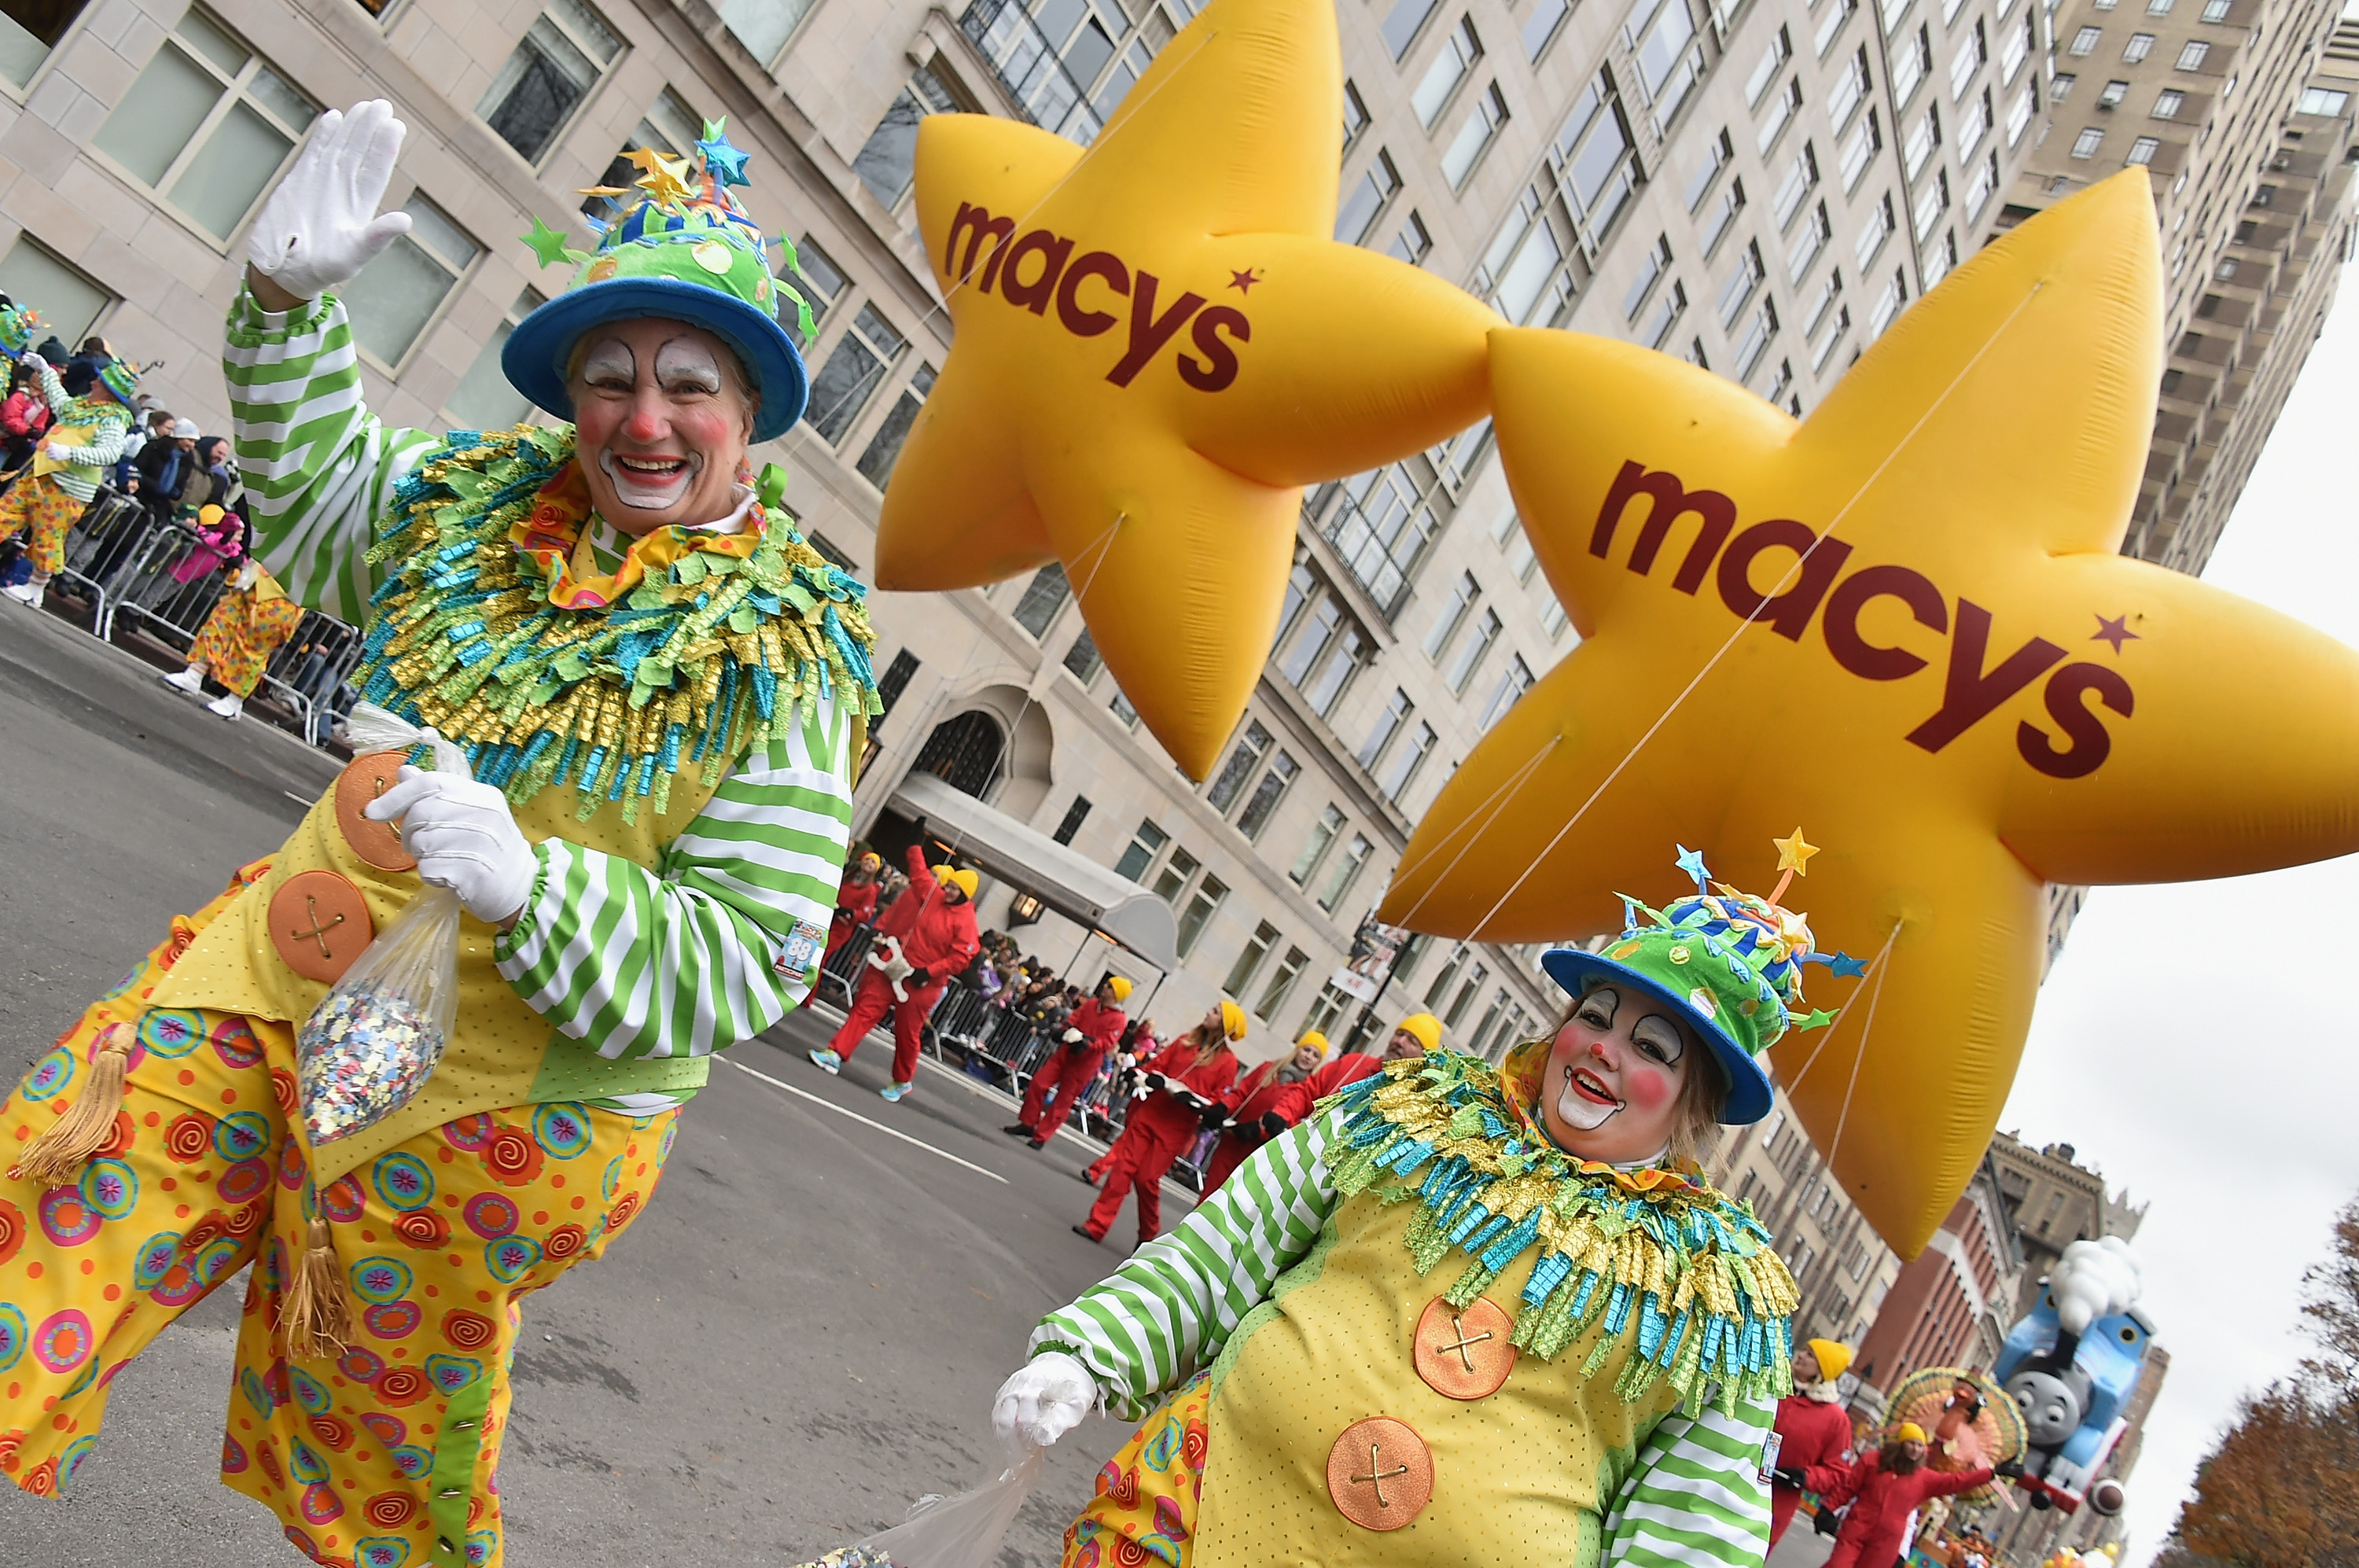 Macy’s Thanksgiving Day Parade 2015 Live Stream Watch Online | Heavy.com - Stream Thanksgiving Parasde Live With Performances